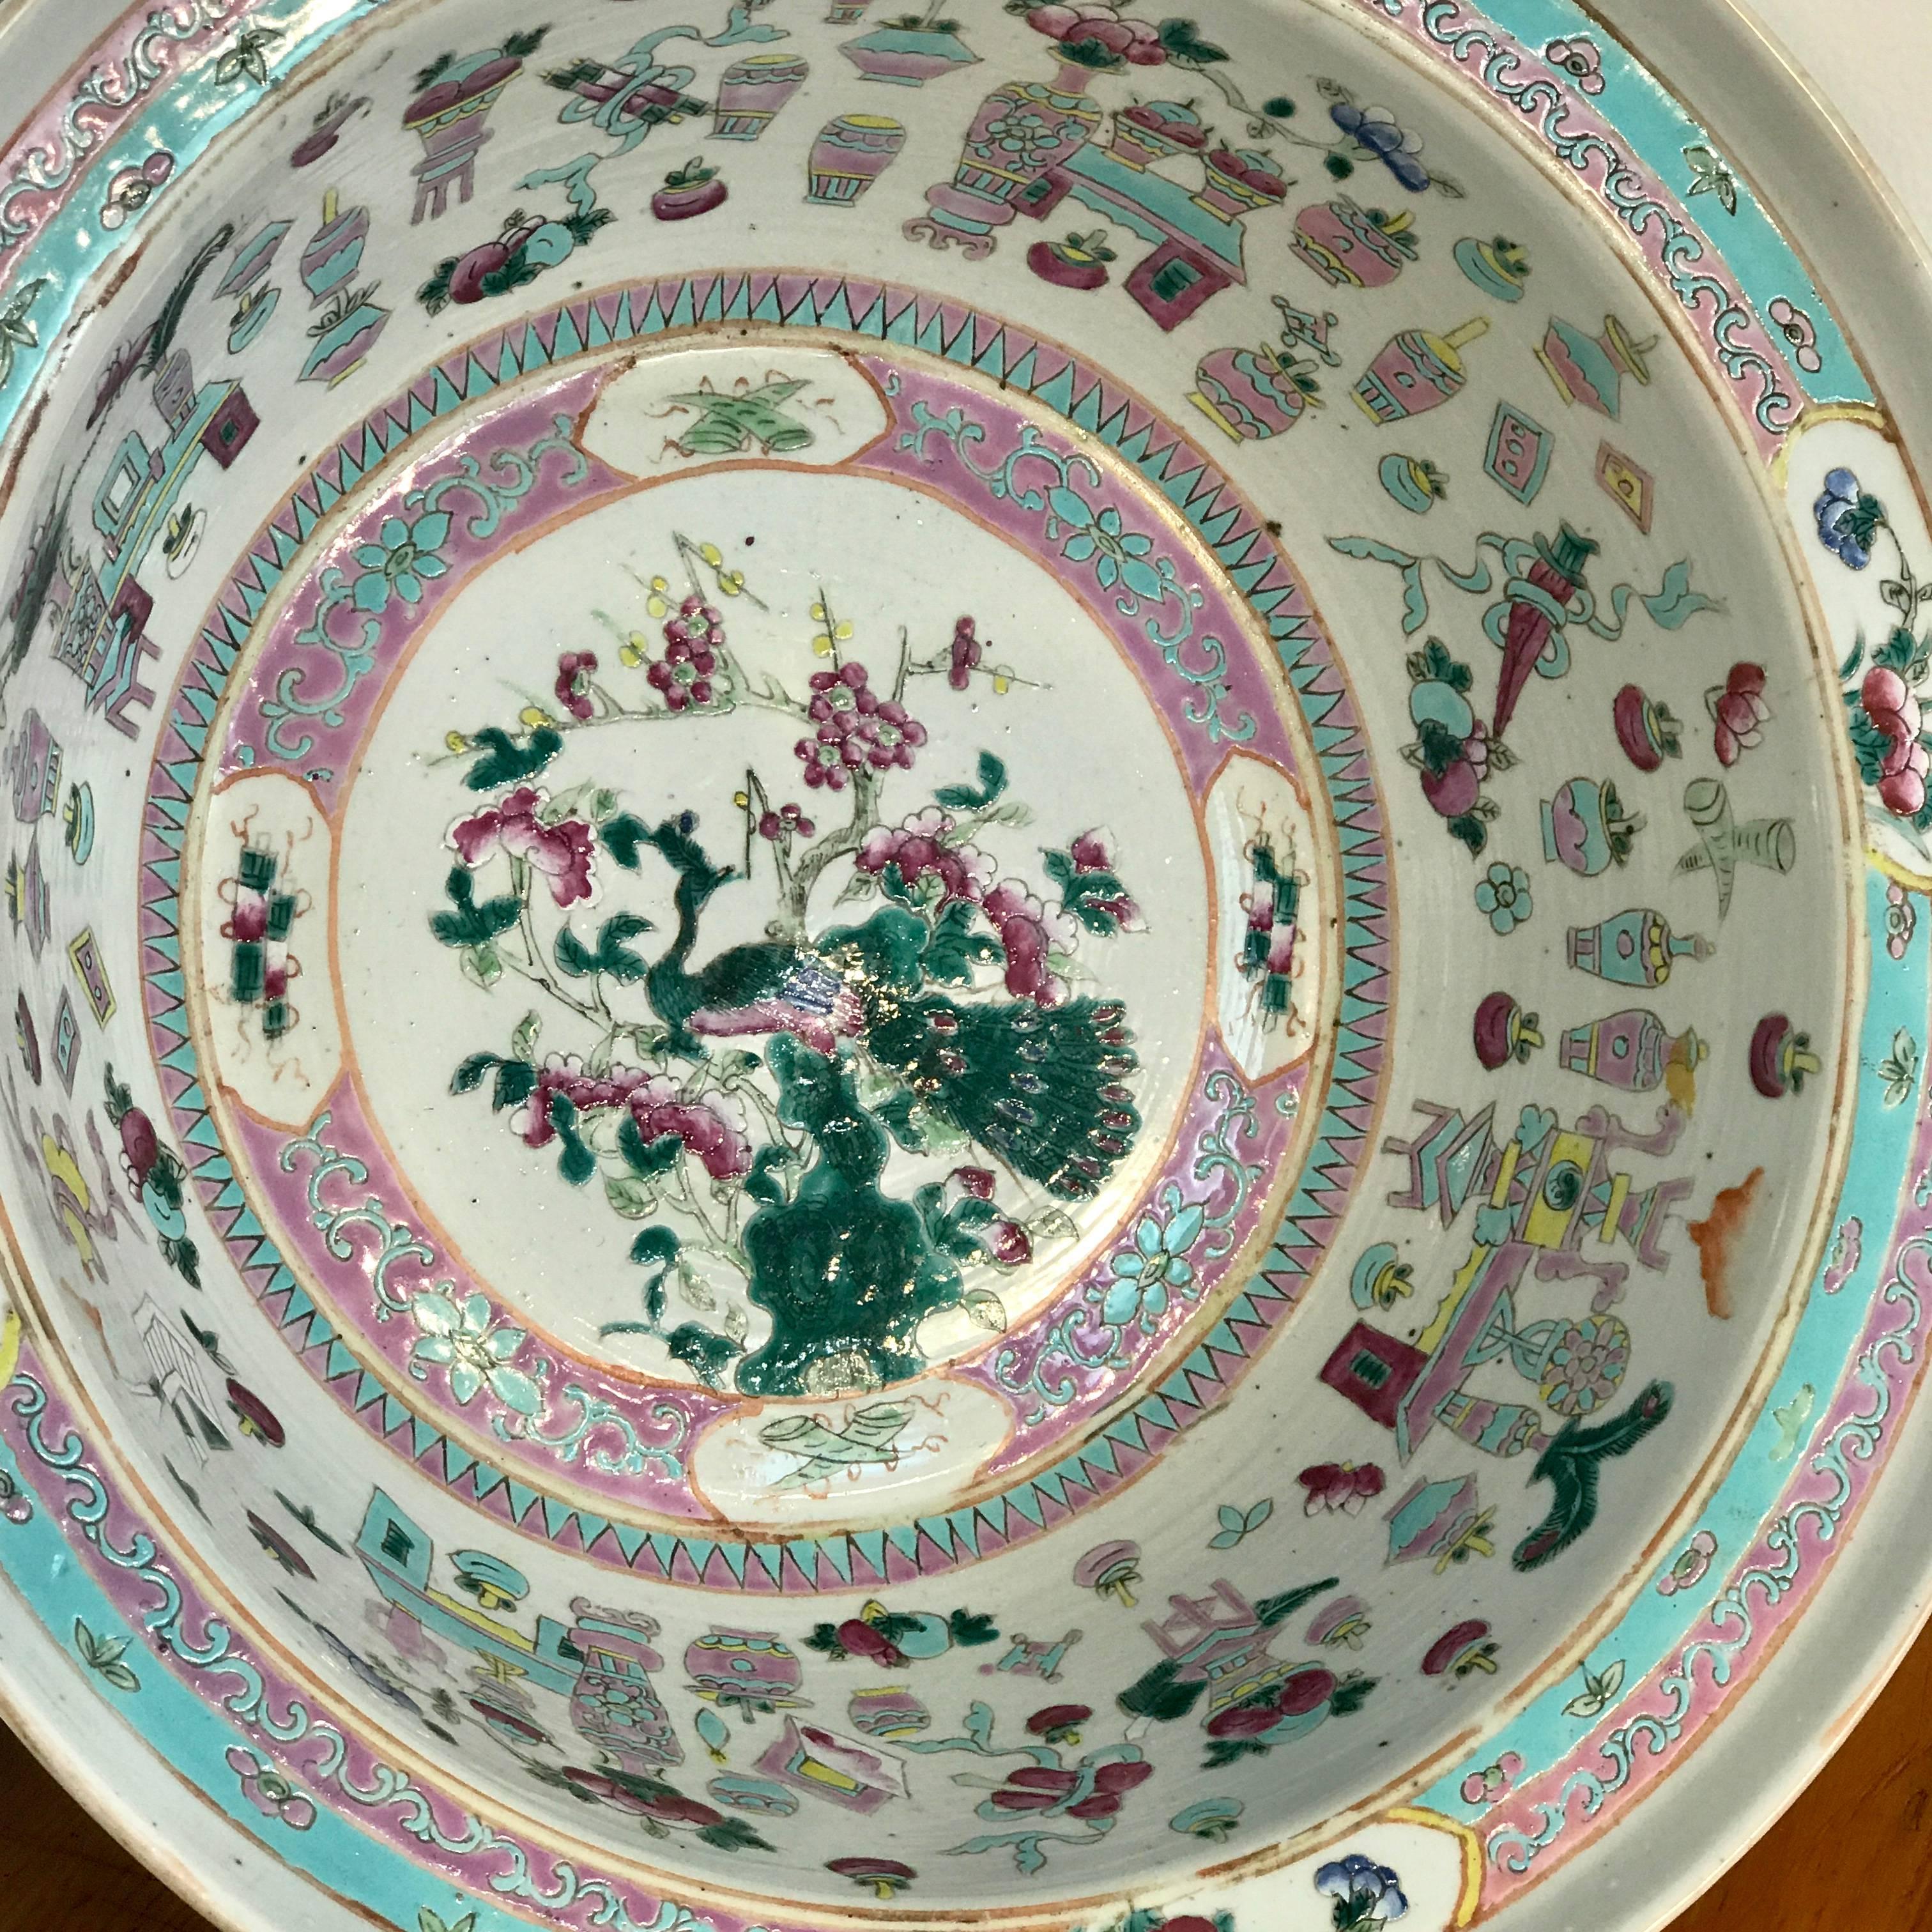 19th Century Large Qing Dynasty Famille Verte Peacock and Vase Motif Bowl